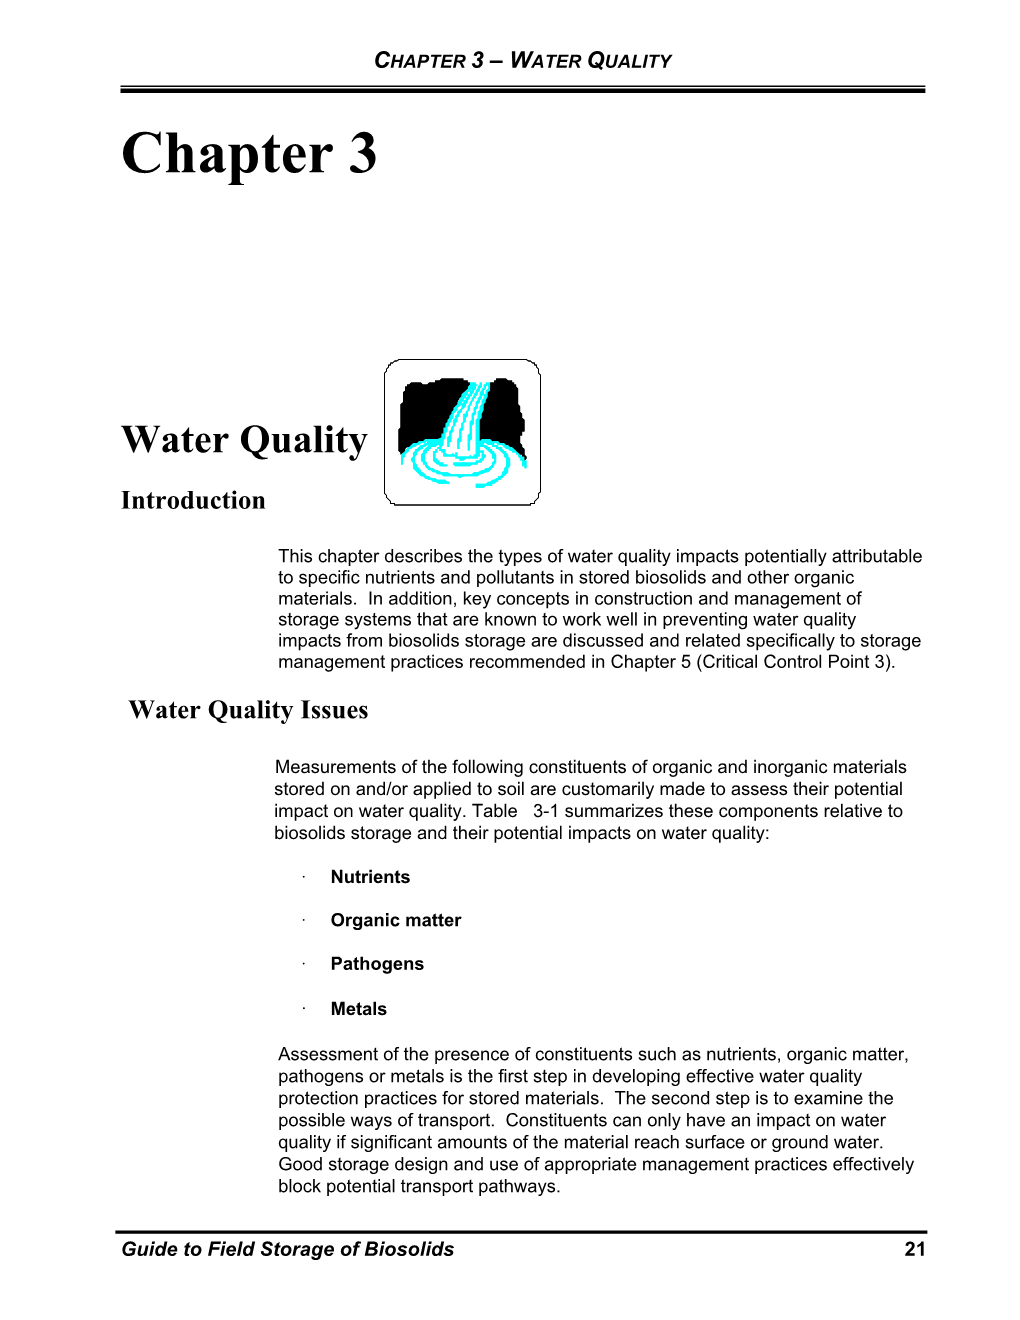 Guide to Field Storage of Biosolids 21 CHAPTER 3 – WATER QUALITY